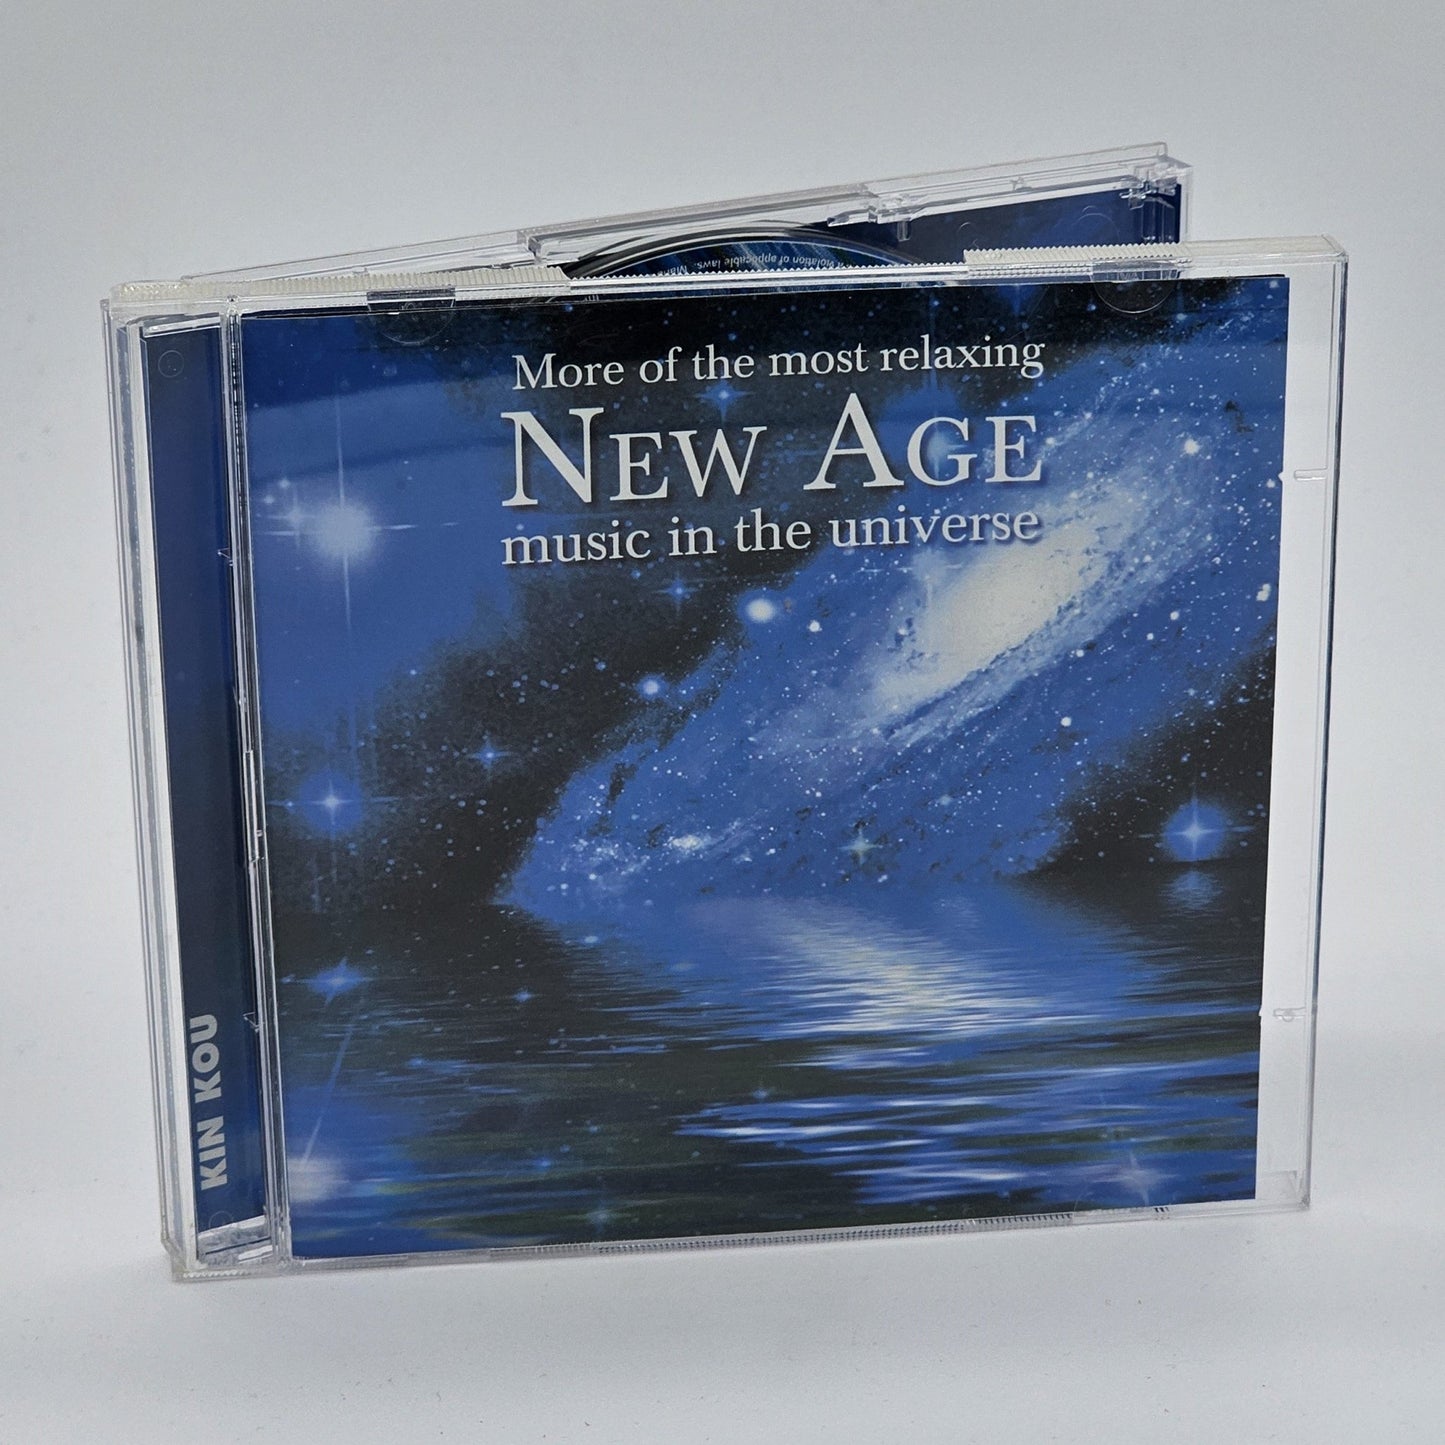 Denon - More Of The Most Relaxing New Age Music In The Universe | 2 CD Set - Compact Disc - Steady Bunny Shop